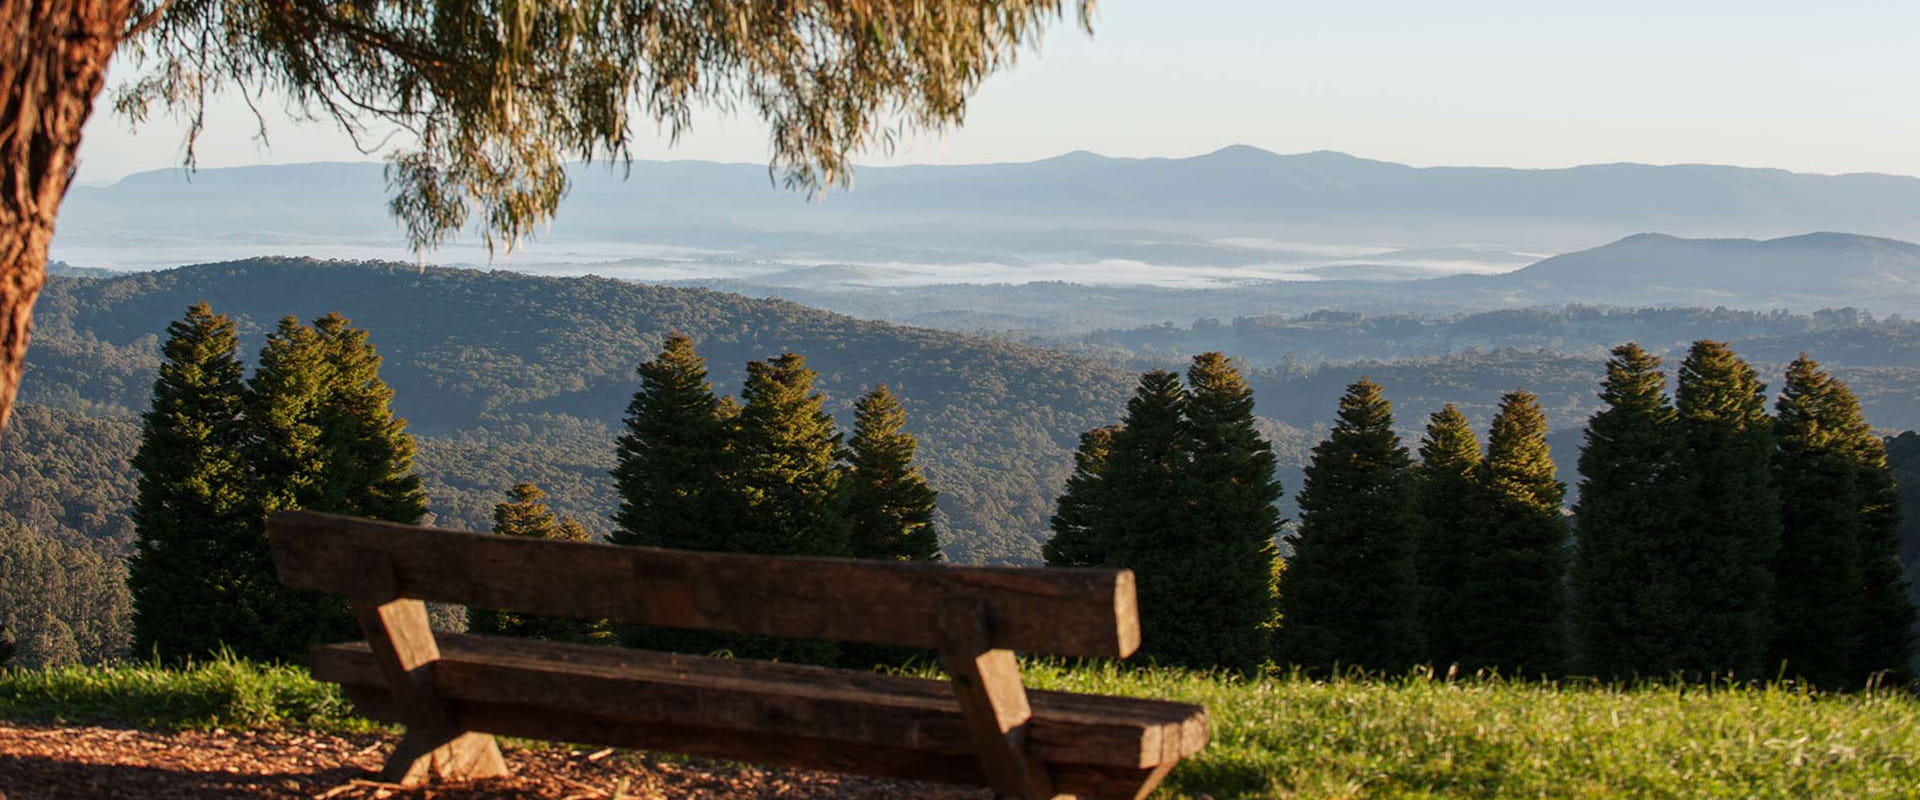 A spectacular view of the Dandenong ranges from a treelined wooden seat